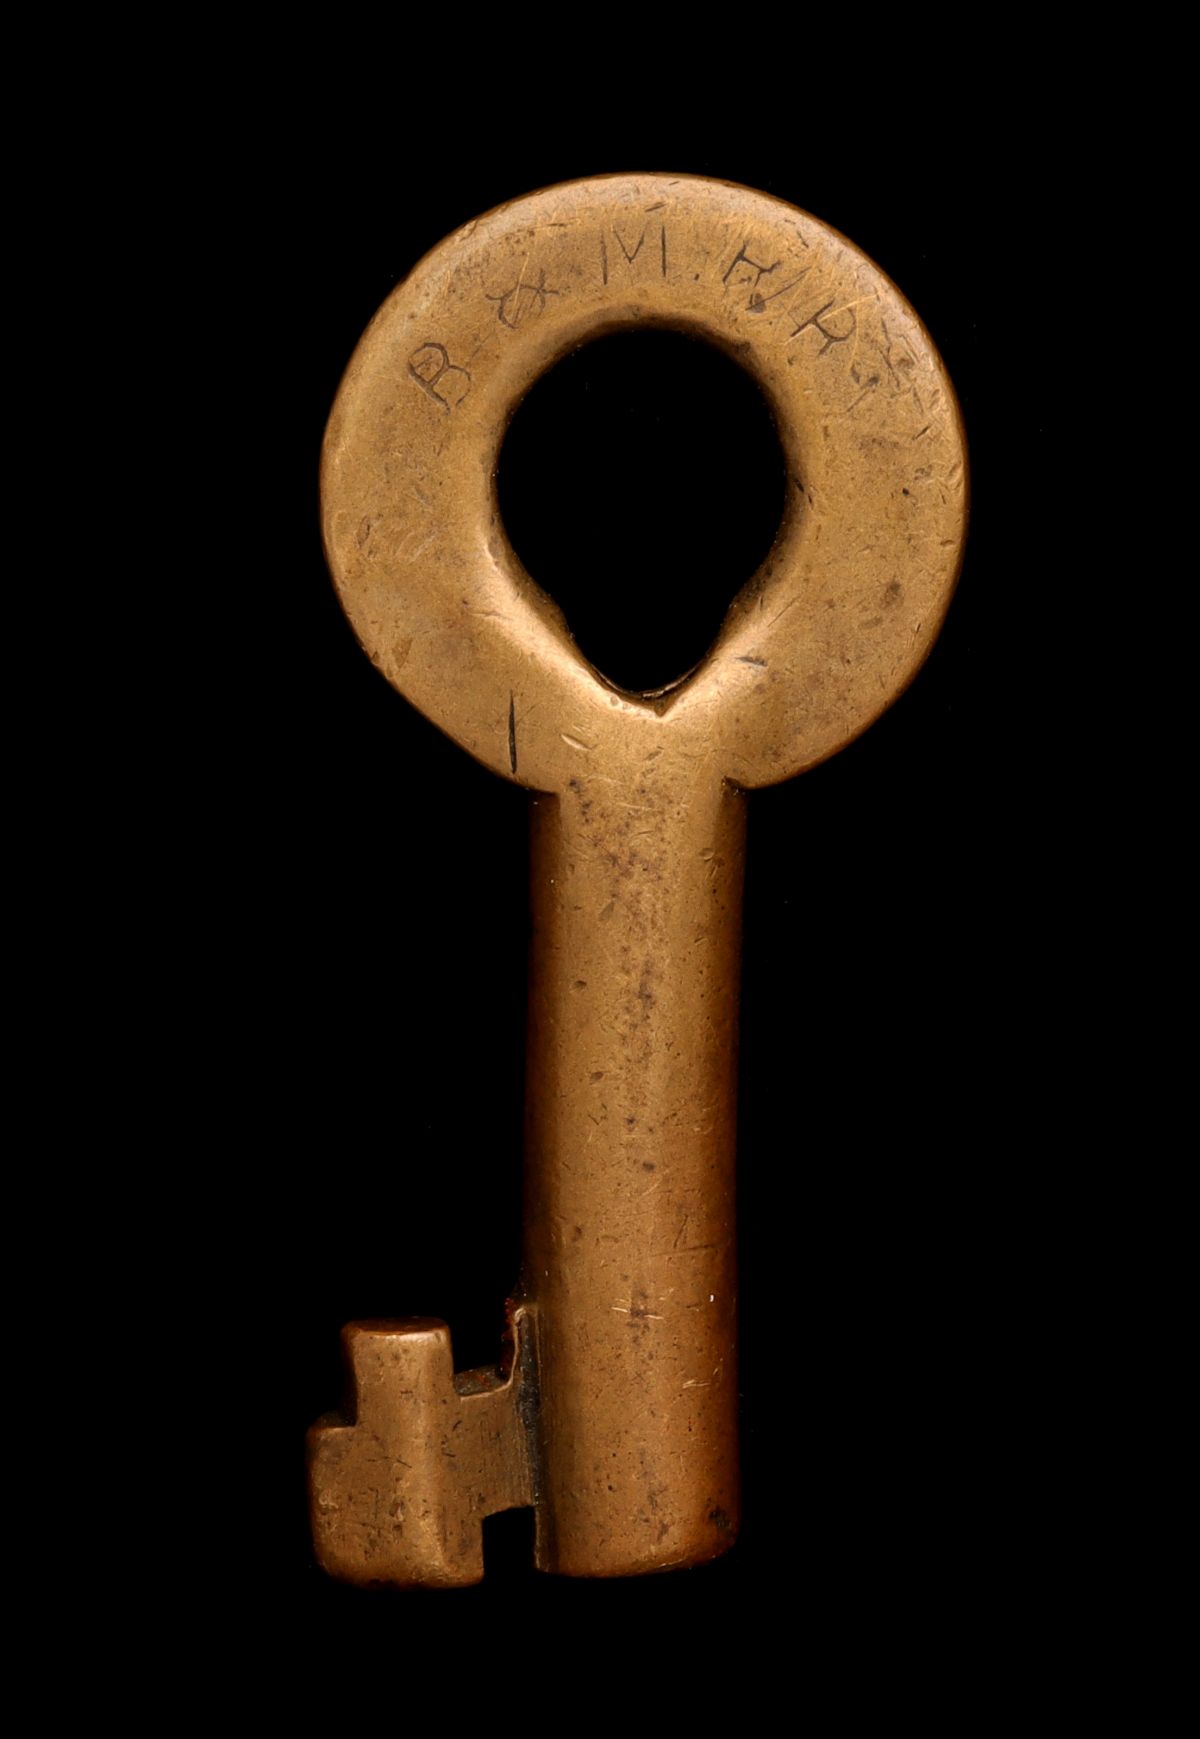 AN EARLIER TYPE BOSTON AND MAINE RAILROAD BRASS KEY